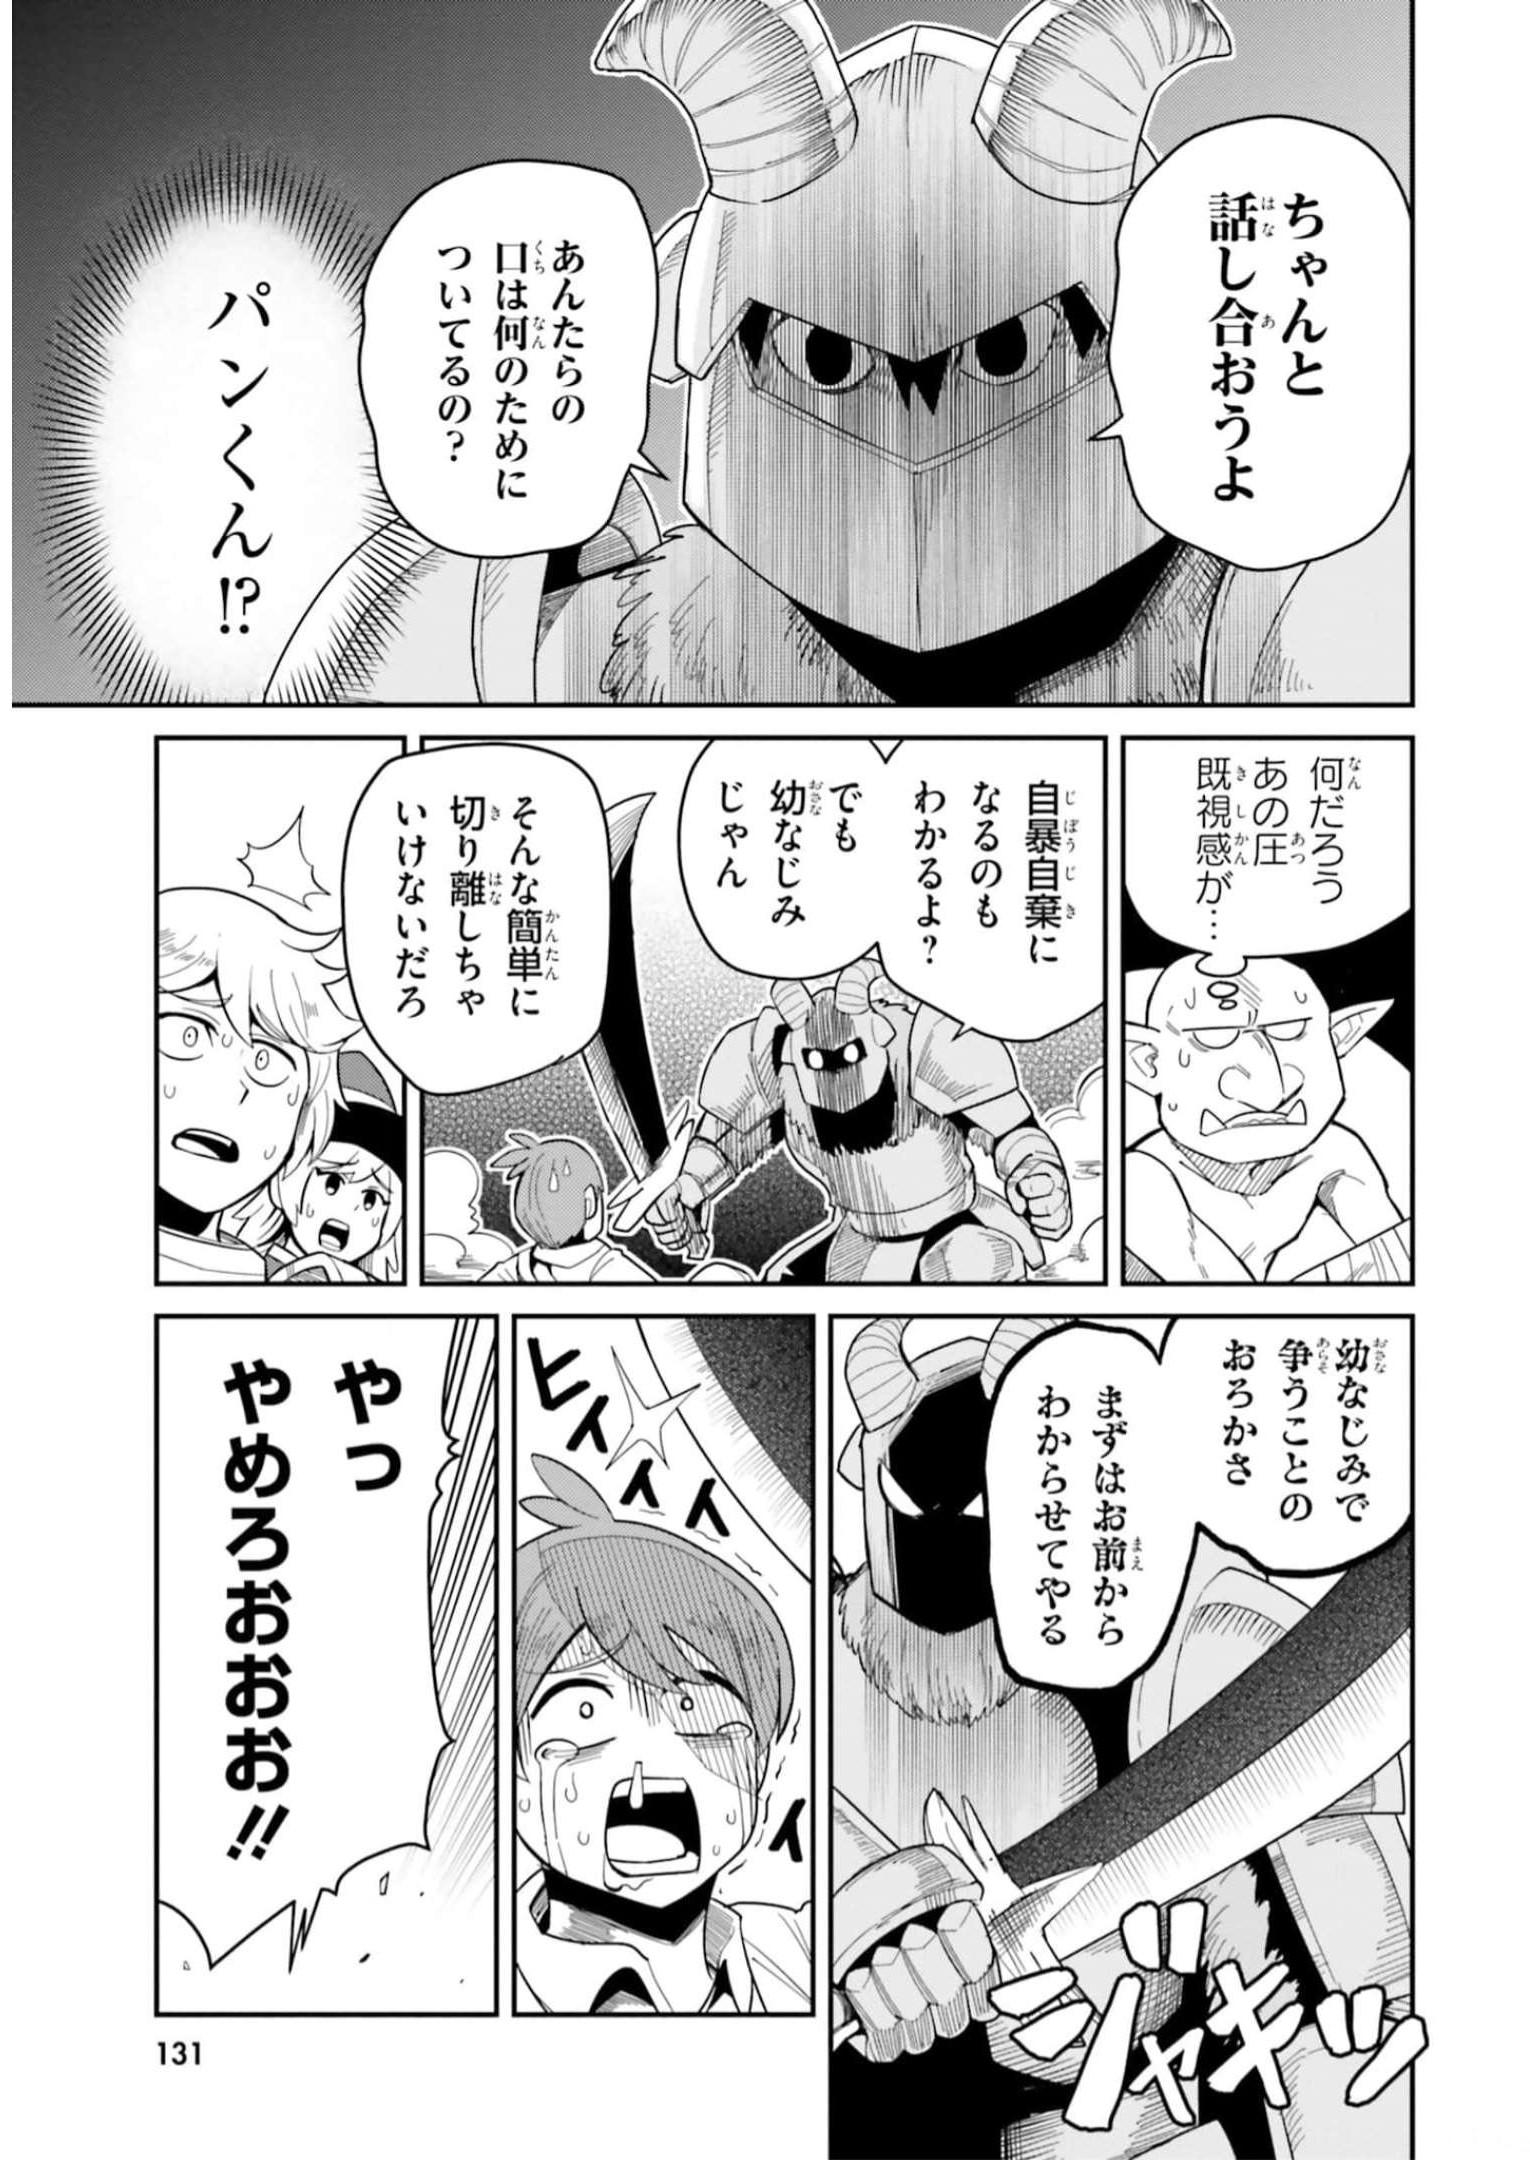 Dungeon Friends Forever Dungeon’s Childhood Friend ダンジョンの幼なじみ 第25話 - Page 15